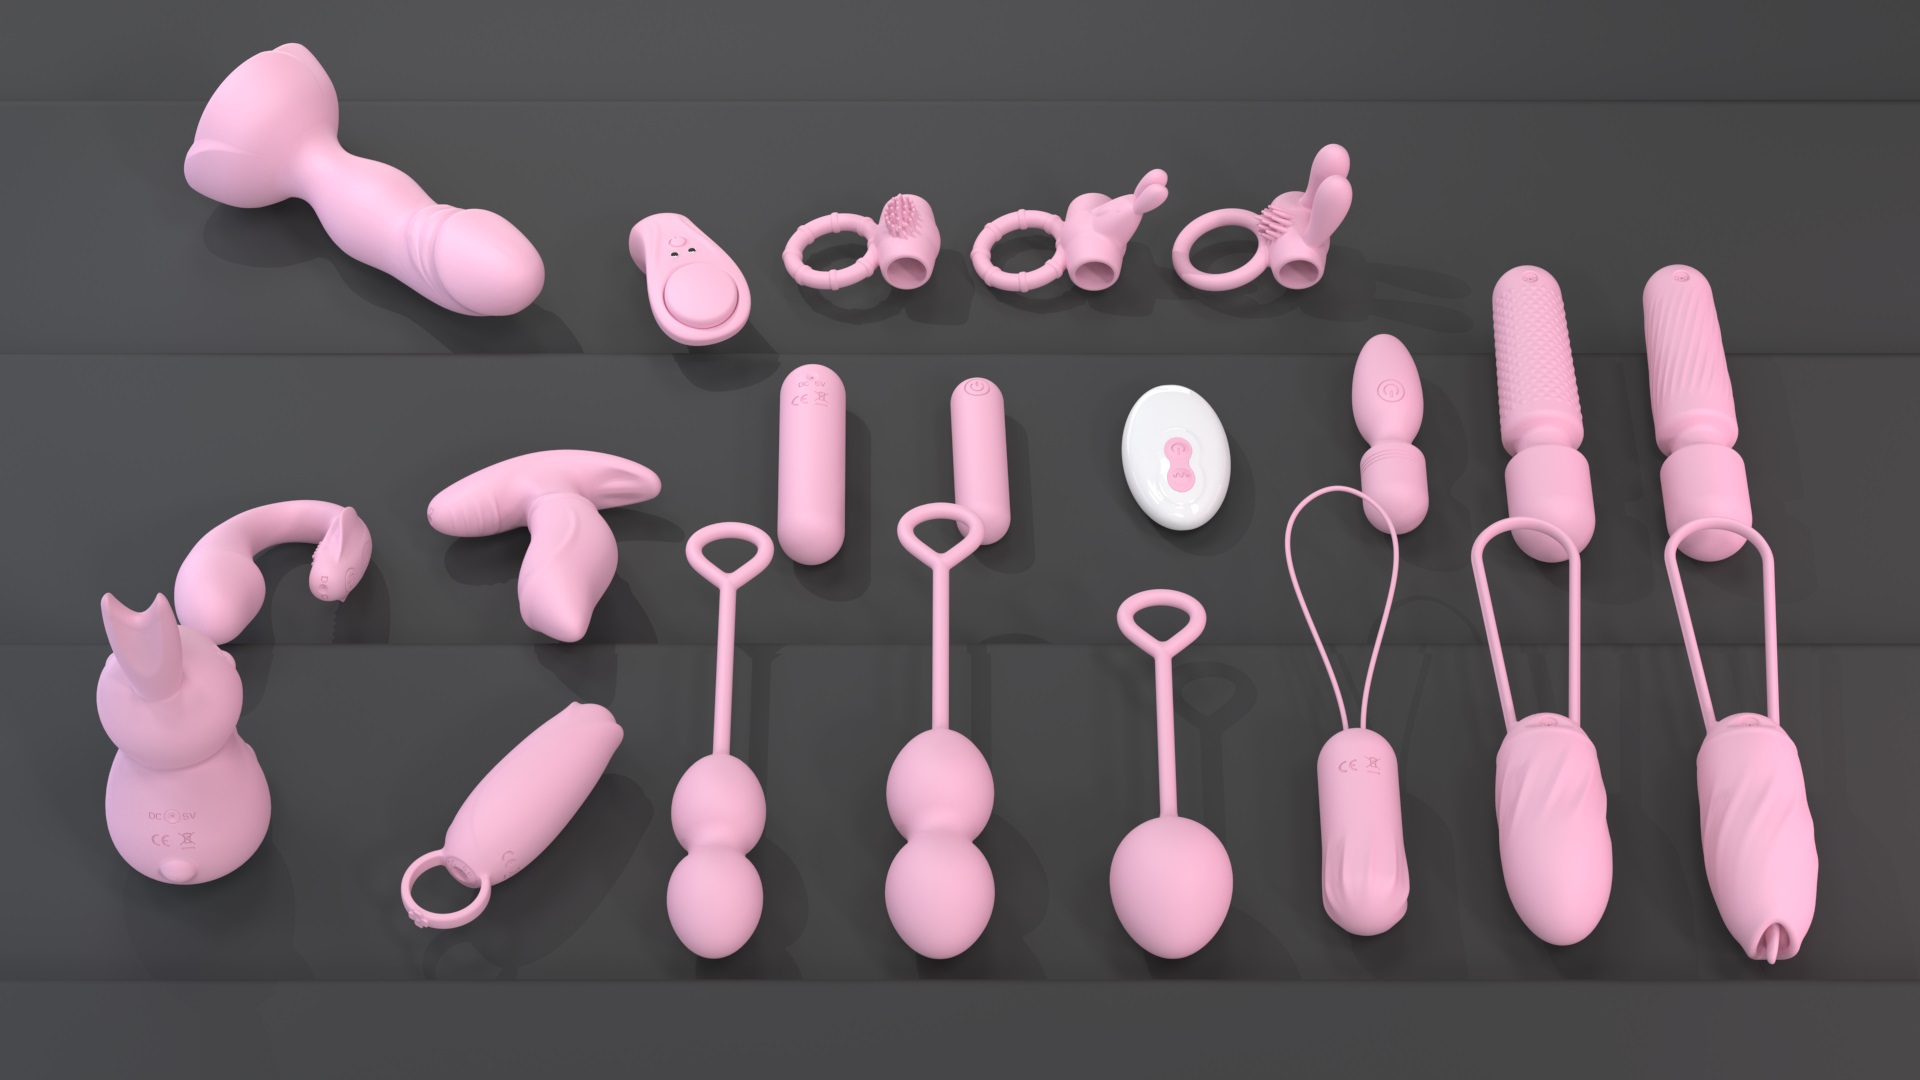 The toys for women